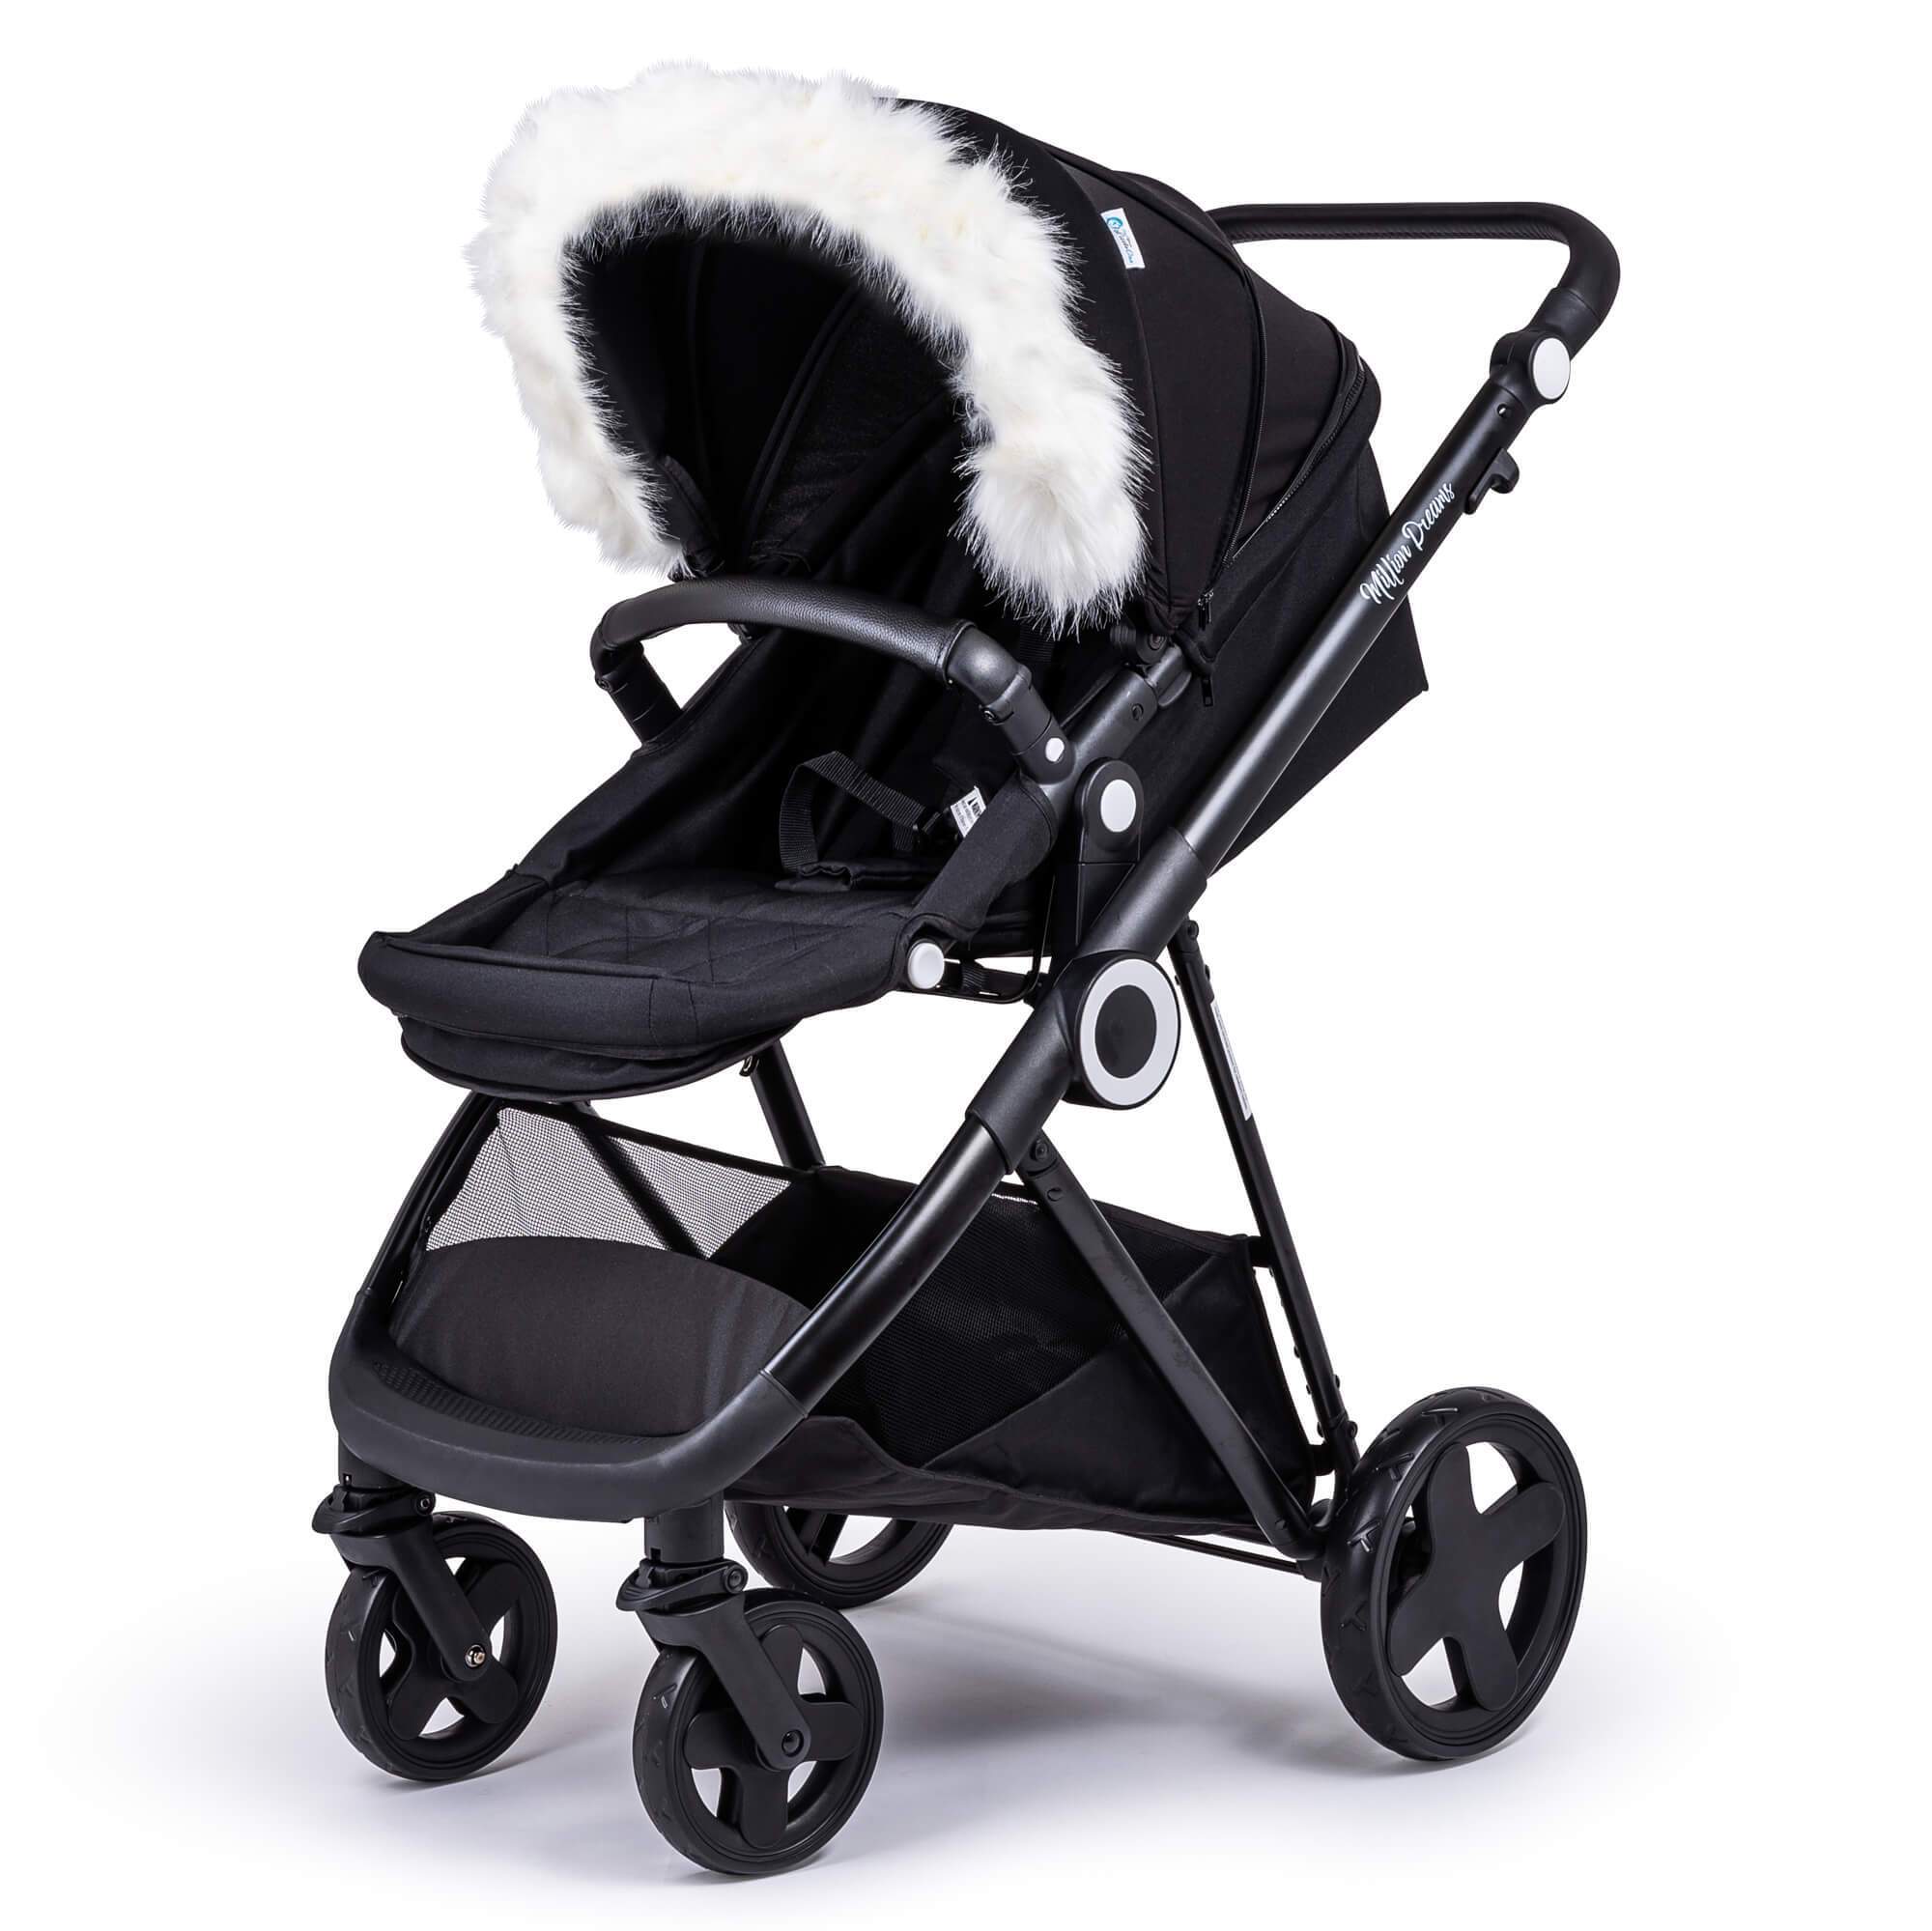 Pram Fur Hood Trim Attachment For Pushchair Compatible with Kinderkraft - White / Fits All Models | For Your Little One